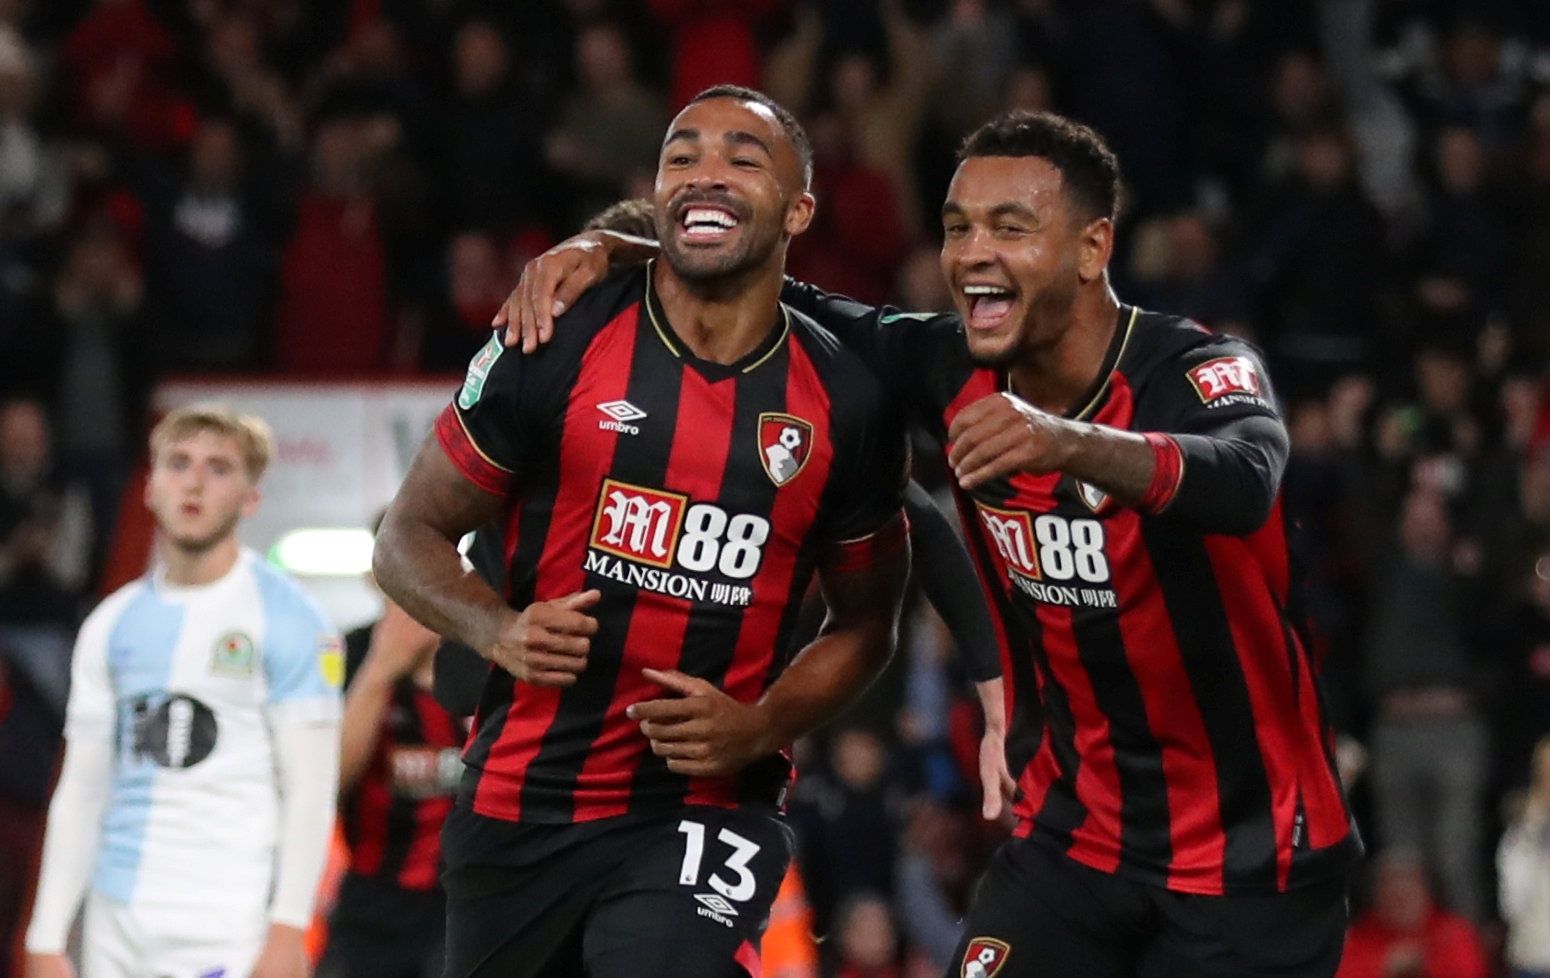 Soccer Football - Carabao Cup - Third Round - AFC Bournemouth v Blackburn Rovers - Vitality Stadium, Bournemouth, Britain - September 25, 2018  Bournemouth's Callum Wilson celebrates scoring their third goal with Joshua King            Action Images via Reuters/Peter Cziborra  EDITORIAL USE ONLY. No use with unauthorized audio, video, data, fixture lists, club/league logos or 